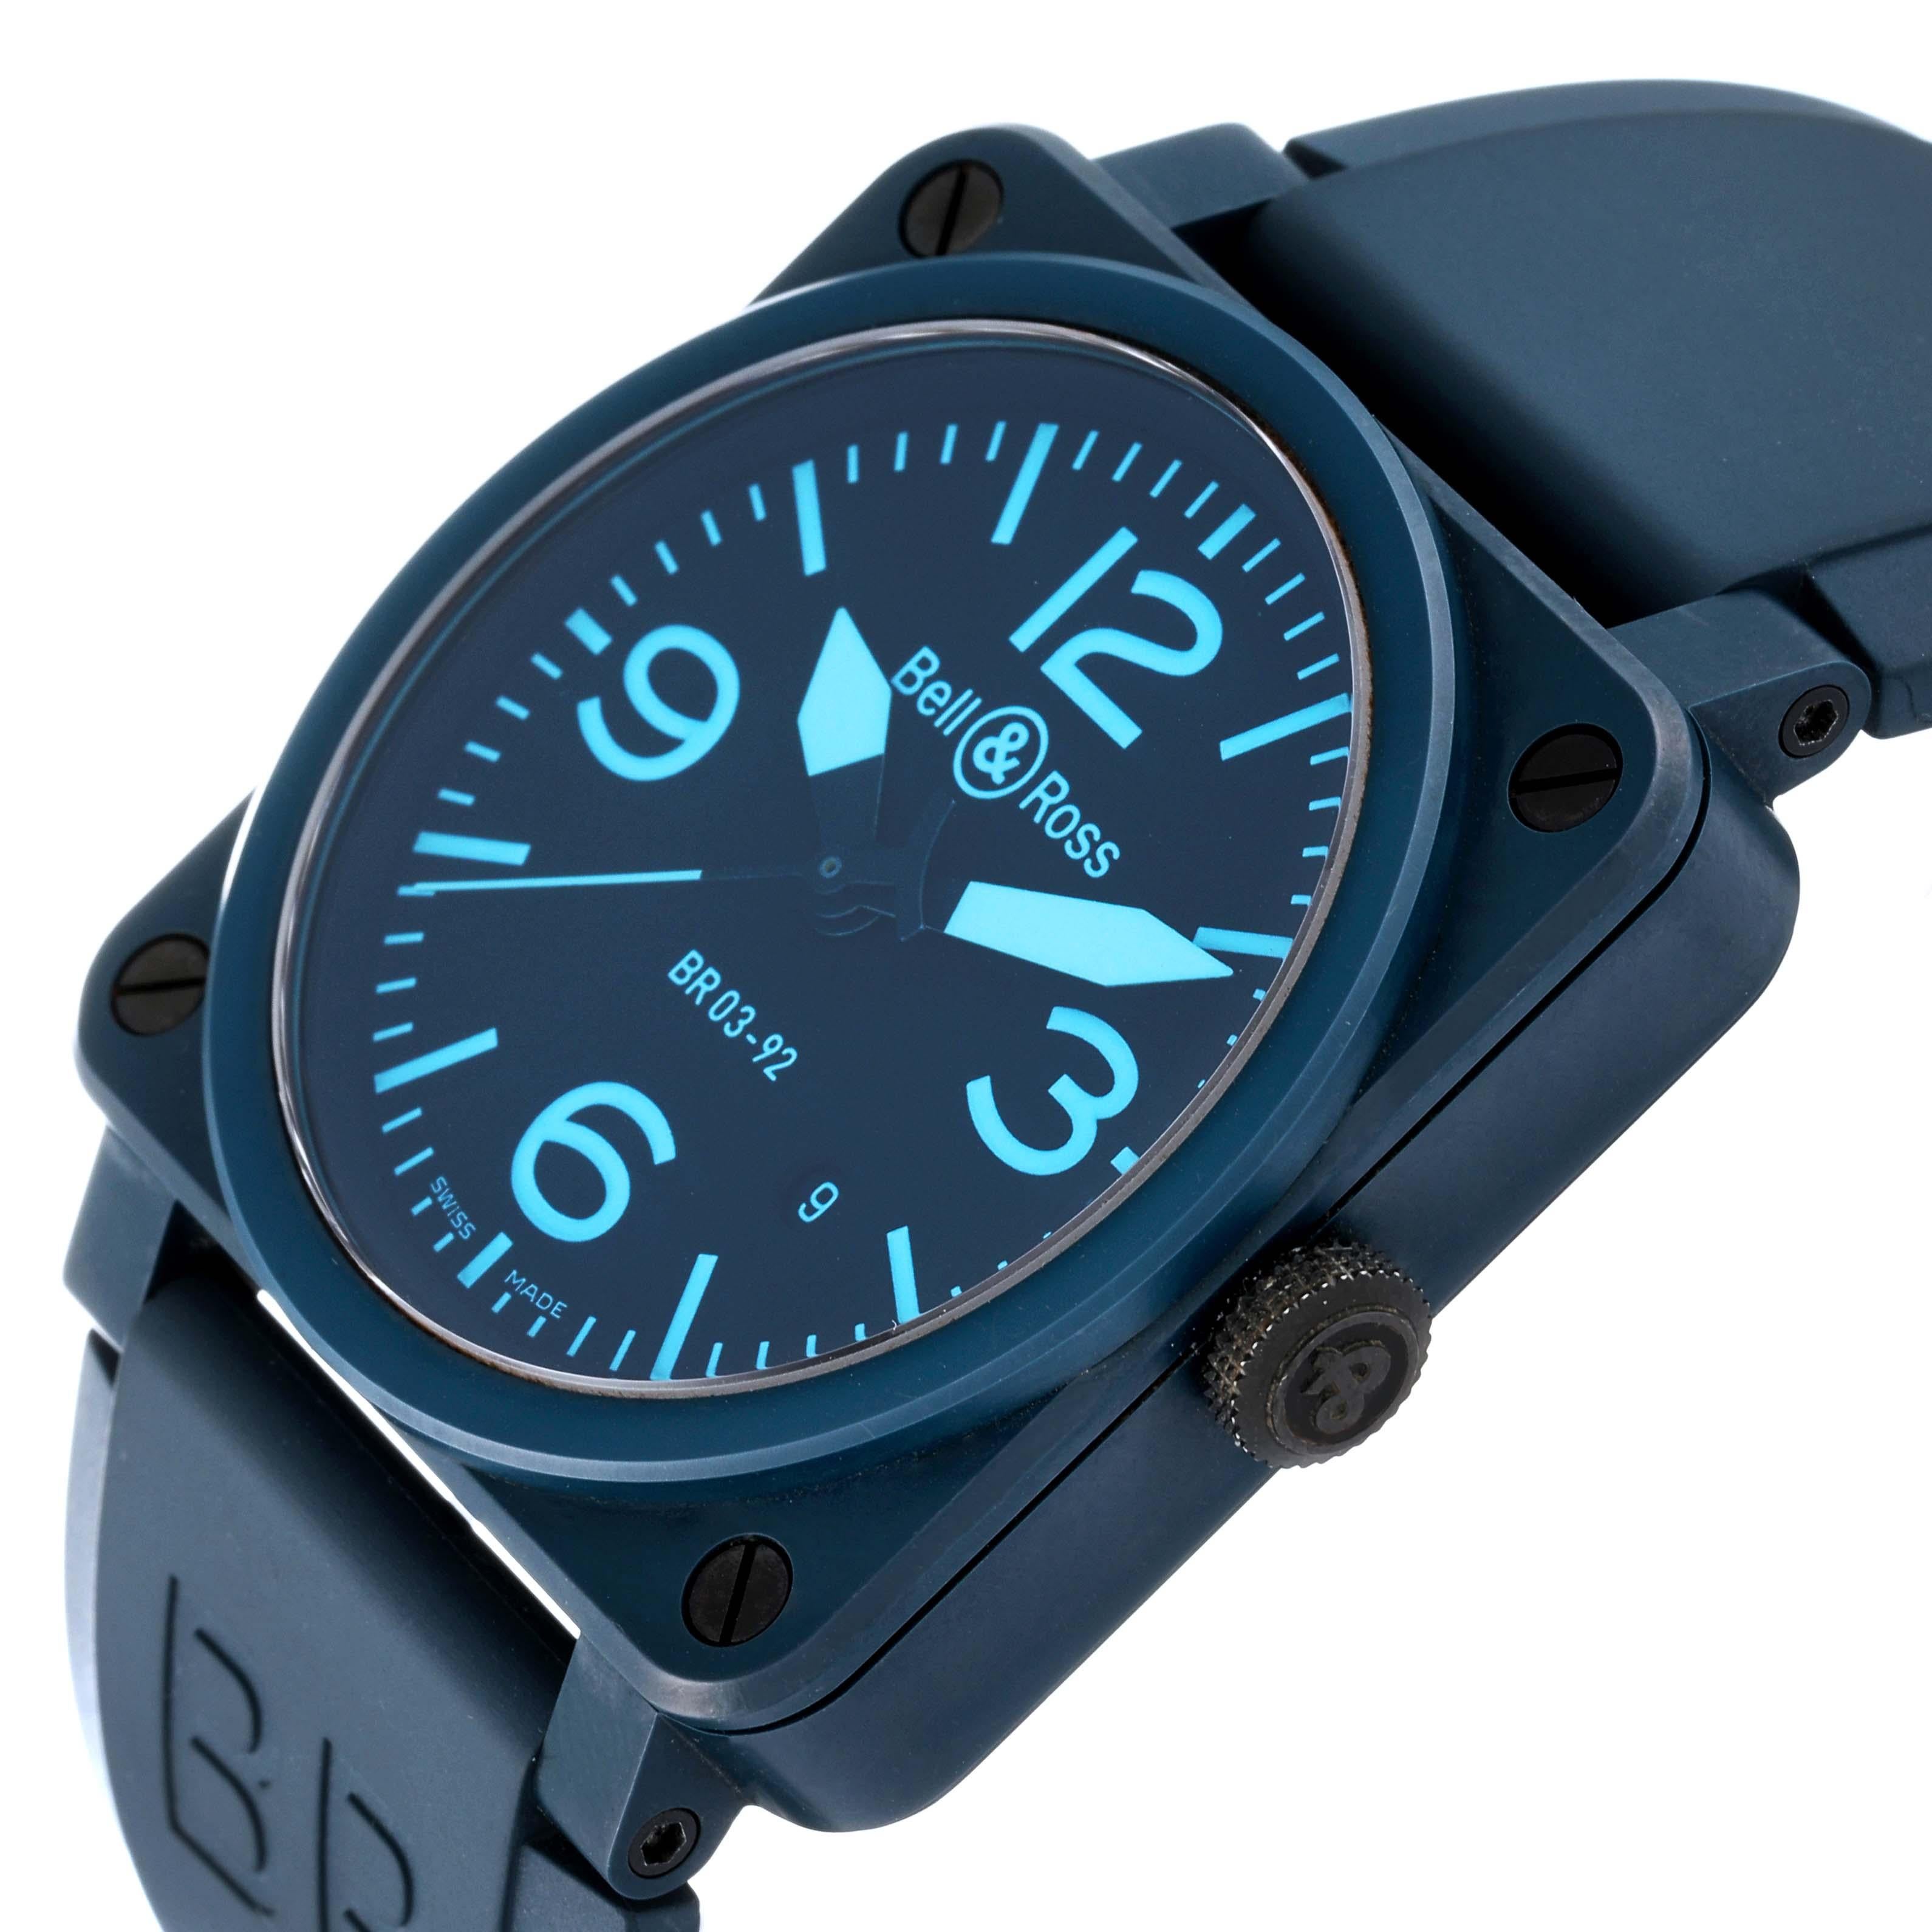 Bell & Ross Aviation Blue Ceramic Mens Watch BR03-92 Box Card. Automatic self-winding movement. Blue ceramic square case 42mm x 42mm. Blue ceramic bezel. Scratch resistant sapphire crystal with anti-reflective coating. Blue dial with blue hands and